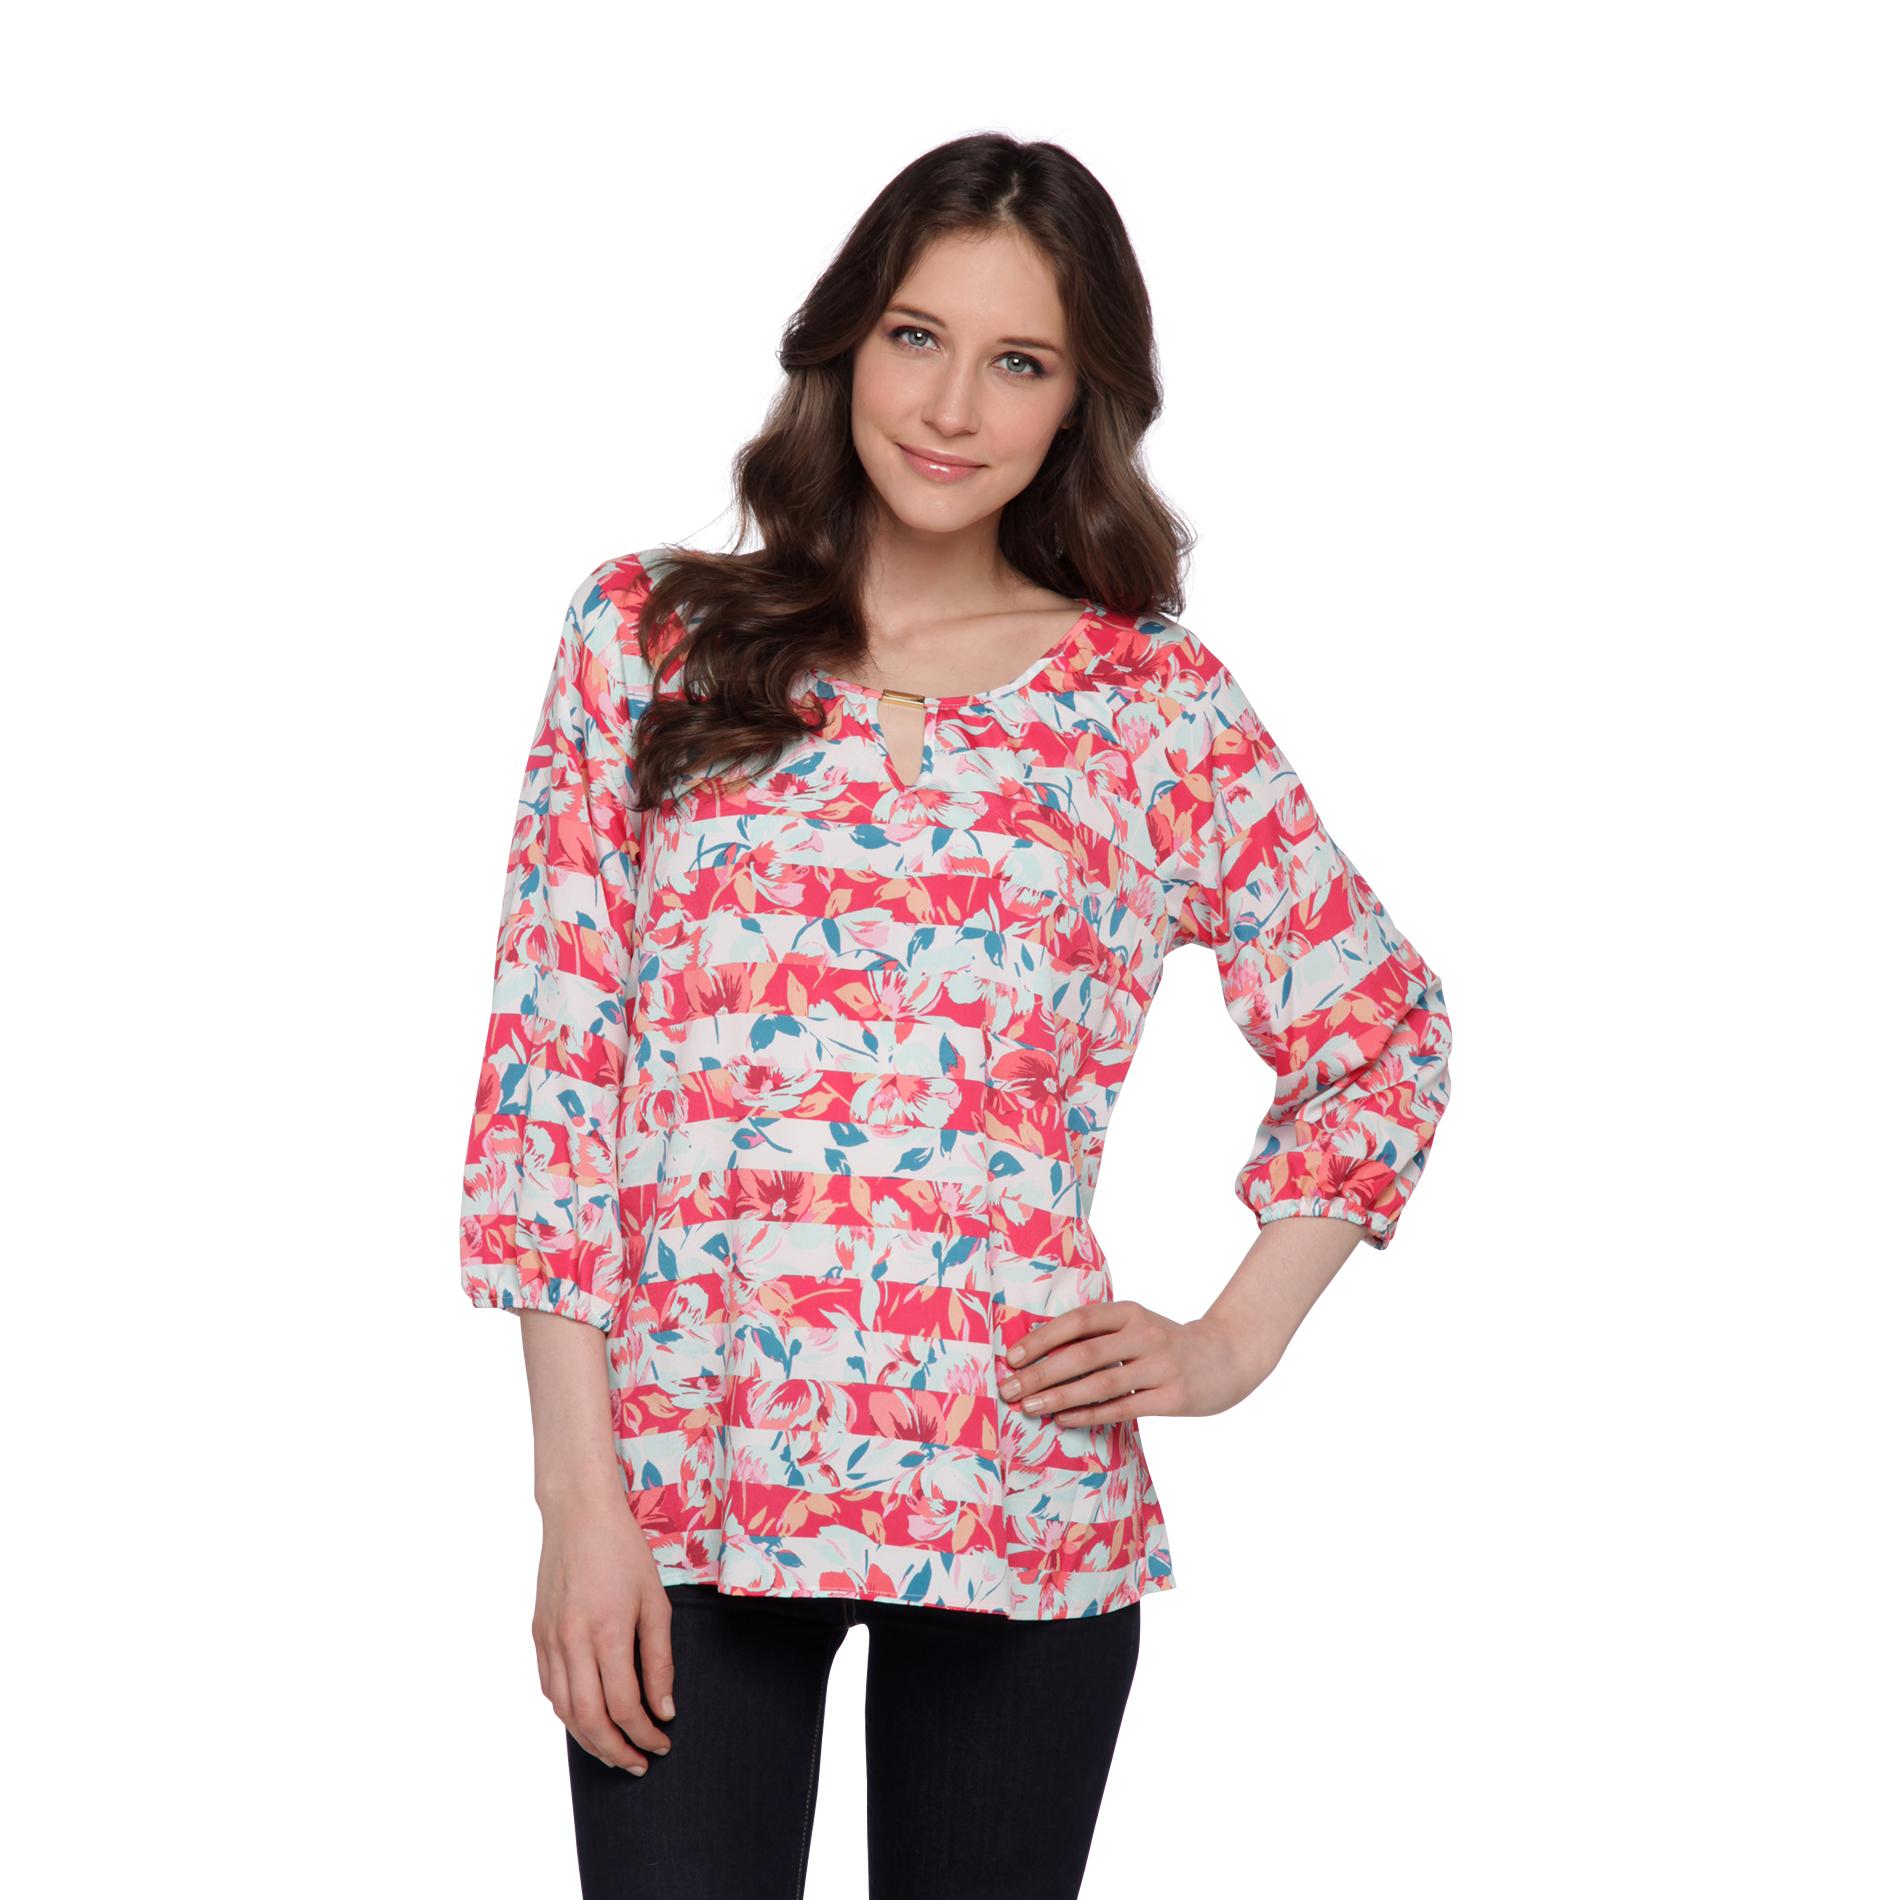 Jaclyn Smith Women's Keyhole Blouse - Floral Striped